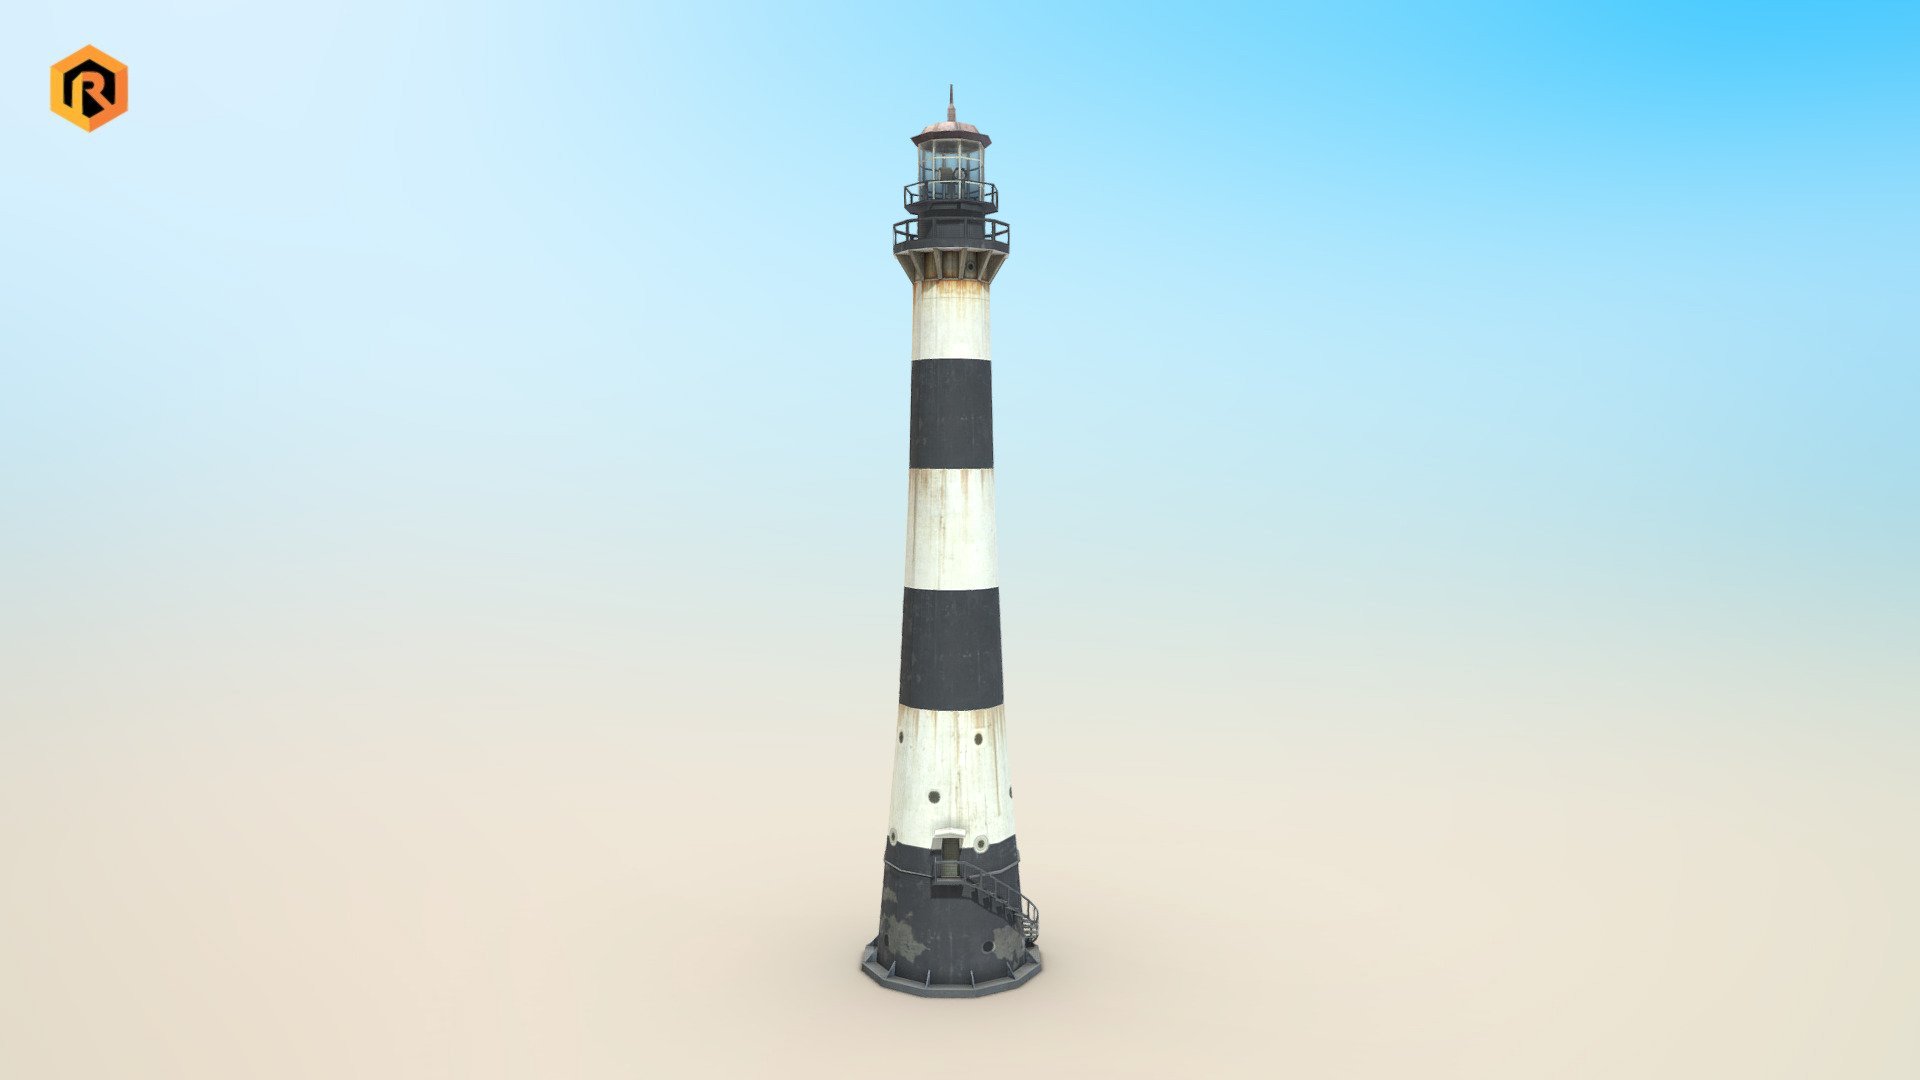 Low-poly 3D model of Light Tower.
It is best for use in games and other VR / AR, real-time applications such as Unity or Unreal Engine.  It can also be rendered in Blender (ex Cycles) or Vray as the model is equipped with detailed textures.  

You can also get this model in a bundle: https://skfb.ly/owqyZ

Technical details:




2048 x 2048 Diffuse and AO texture set

1206 Triangles

1015 Vertices

Model is one mesh.

Model completely unwrapped.

Model is fully textured with all materials applied. 

All nodes, materials and textures are appropriately named.

Lot of additional file formats included (Blender, Unity, Maya etc.) 

More file formats are available in additional zip file on product page.

Please feel free to contact me if you have any questions or need any support for this asset.

Support e-mail: support@rescue3d.com - Port Canaveral Lighthouse - Buy Royalty Free 3D model by Rescue3D Assets (@rescue3d) 3d model